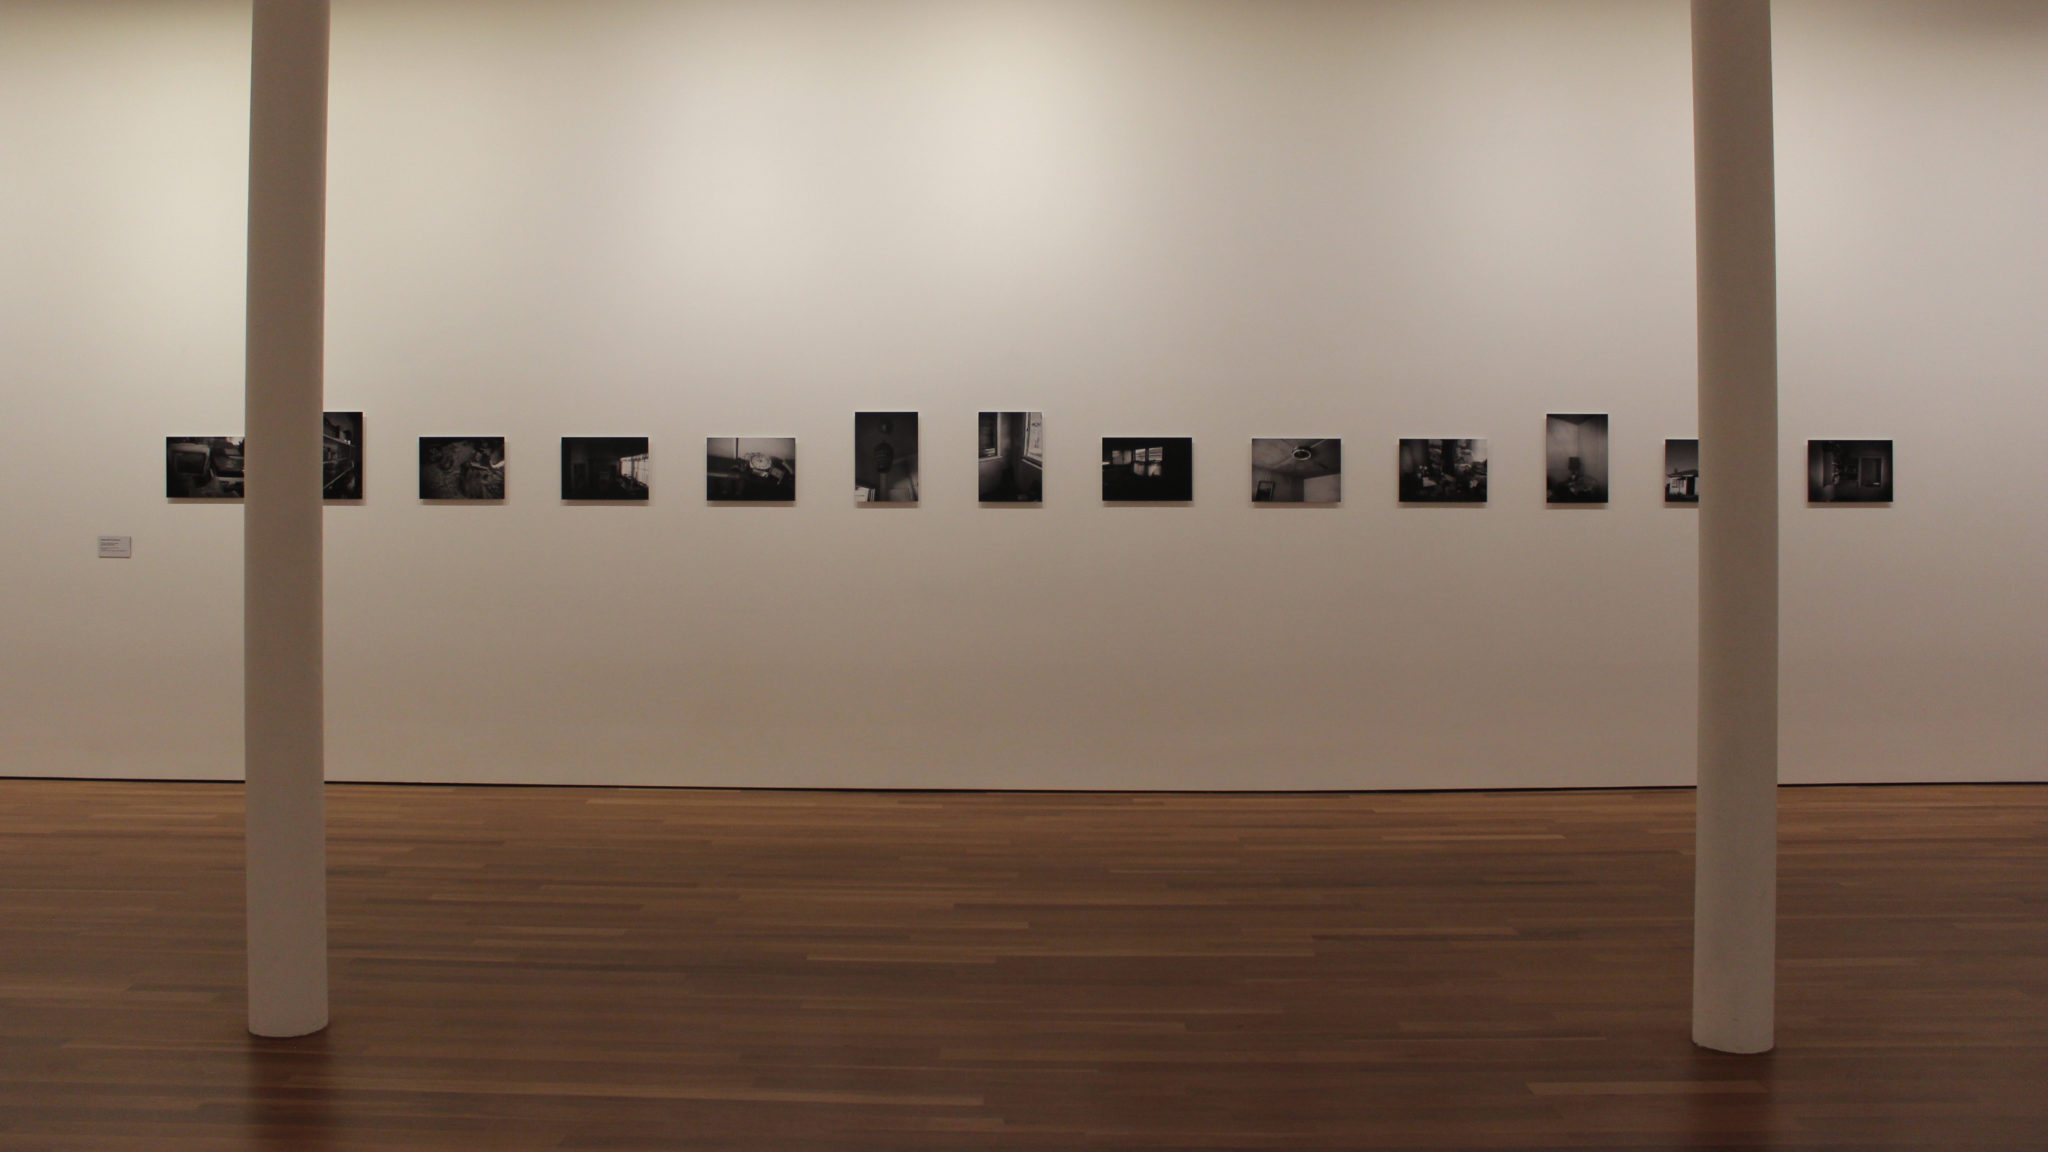 Installation view of Pezaloom, Long after love left (series), 2014, Type C photograph on dibond mount, 29.7 x 42 cm, Latrobe Regional Gallery Collection, purchased 2019. Shown Gallery 4, Latrobe Regional Gallery, 2020.